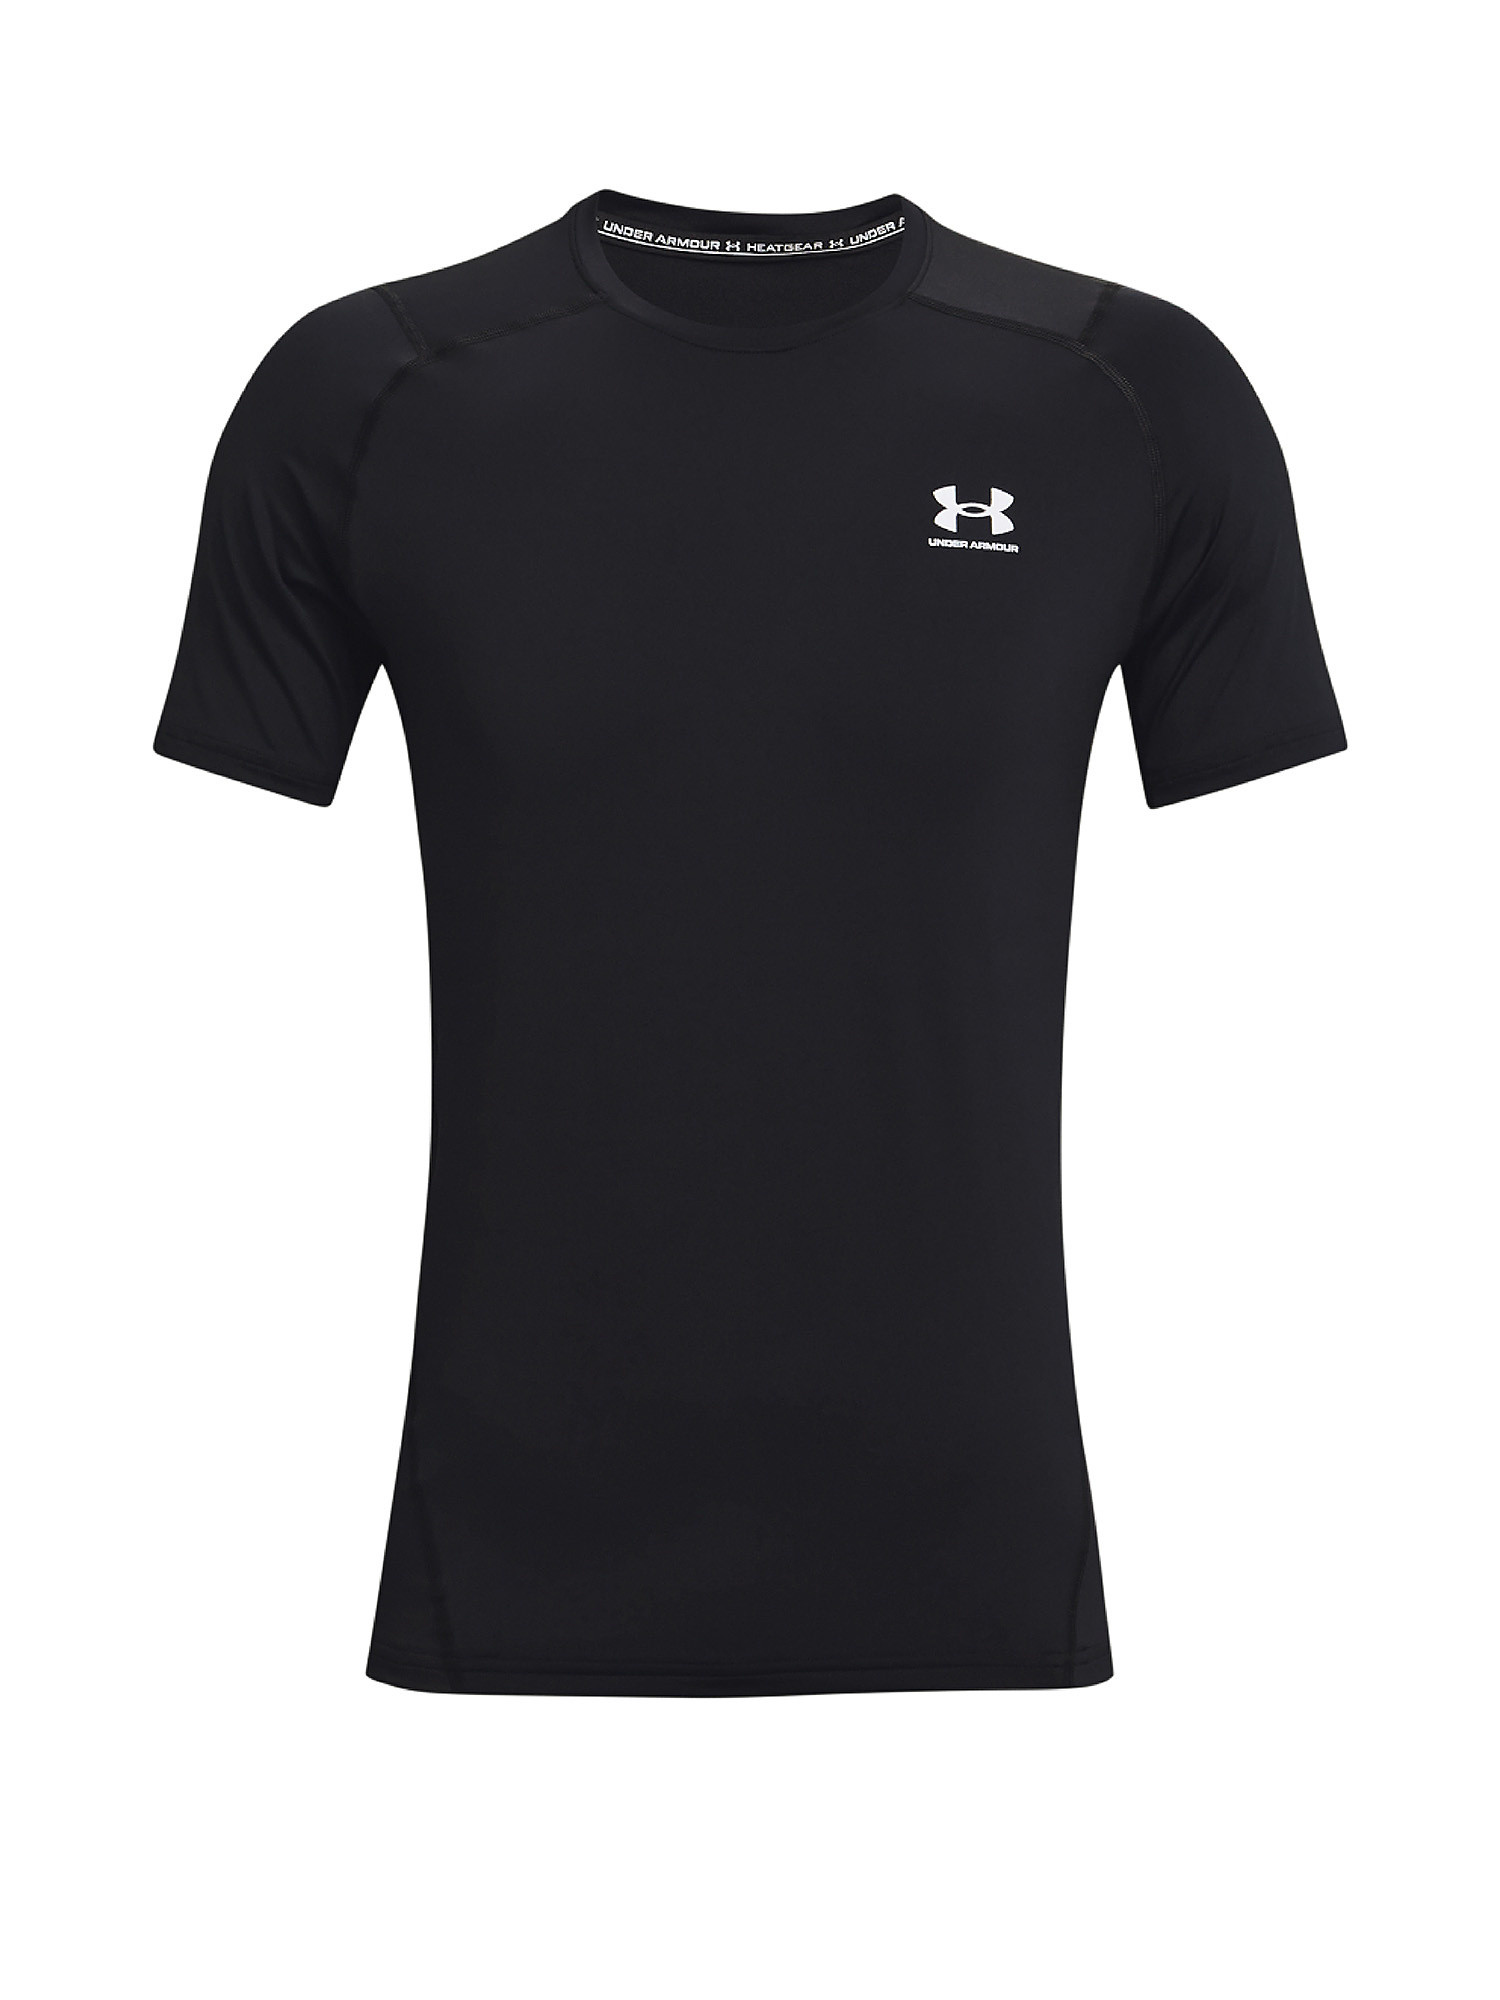 Under Armour - HeatGear® Armor Fitted Short Sleeve Shirt, Black, large image number 0